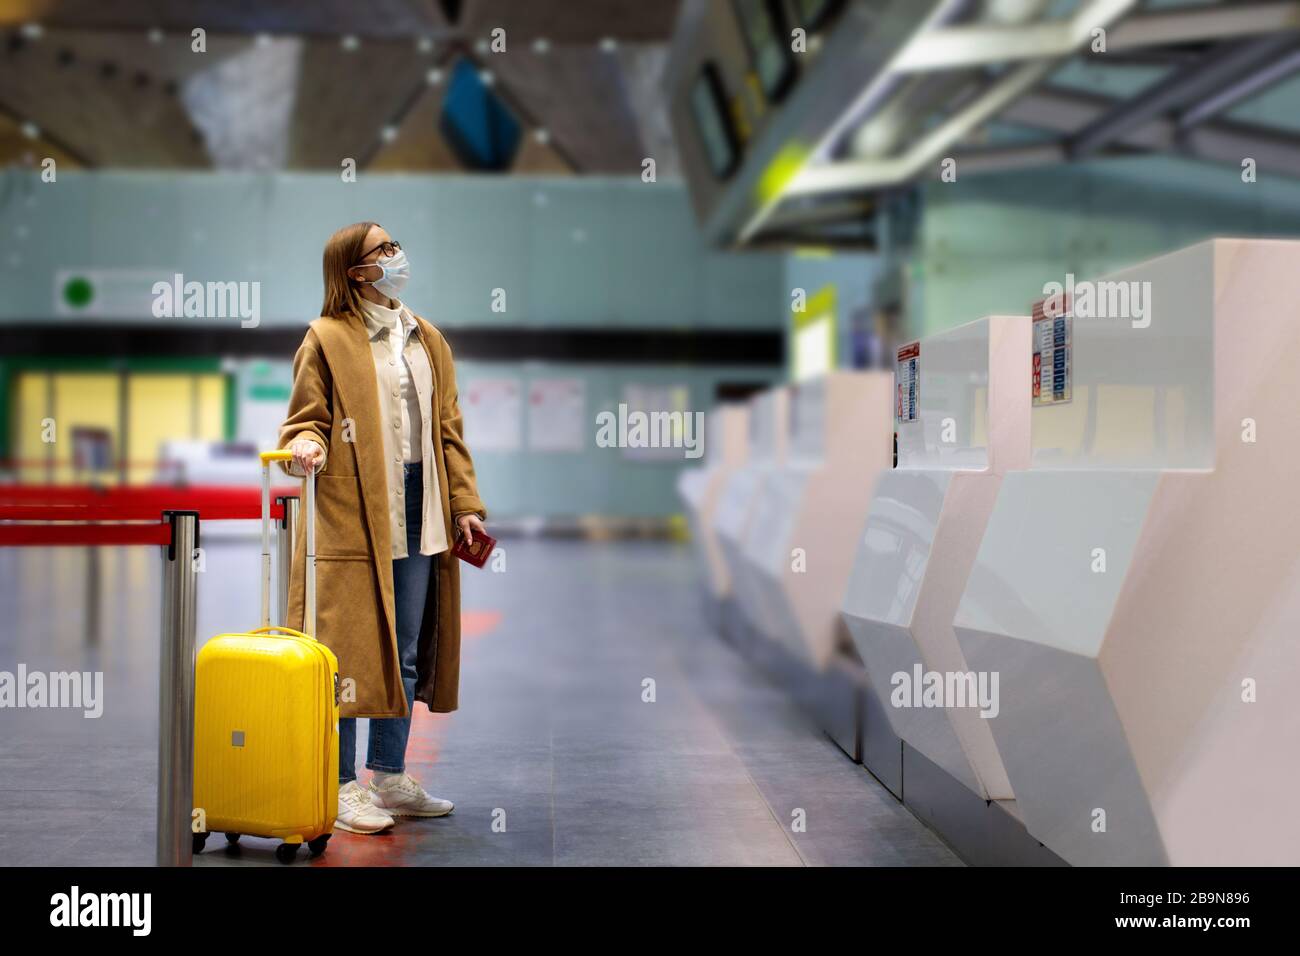 Woman with luggage stands at almost empty check-in counters at the airport terminal due to coronavirus pandemic/Covid-19 outbreak travel restrictions. Stock Photo